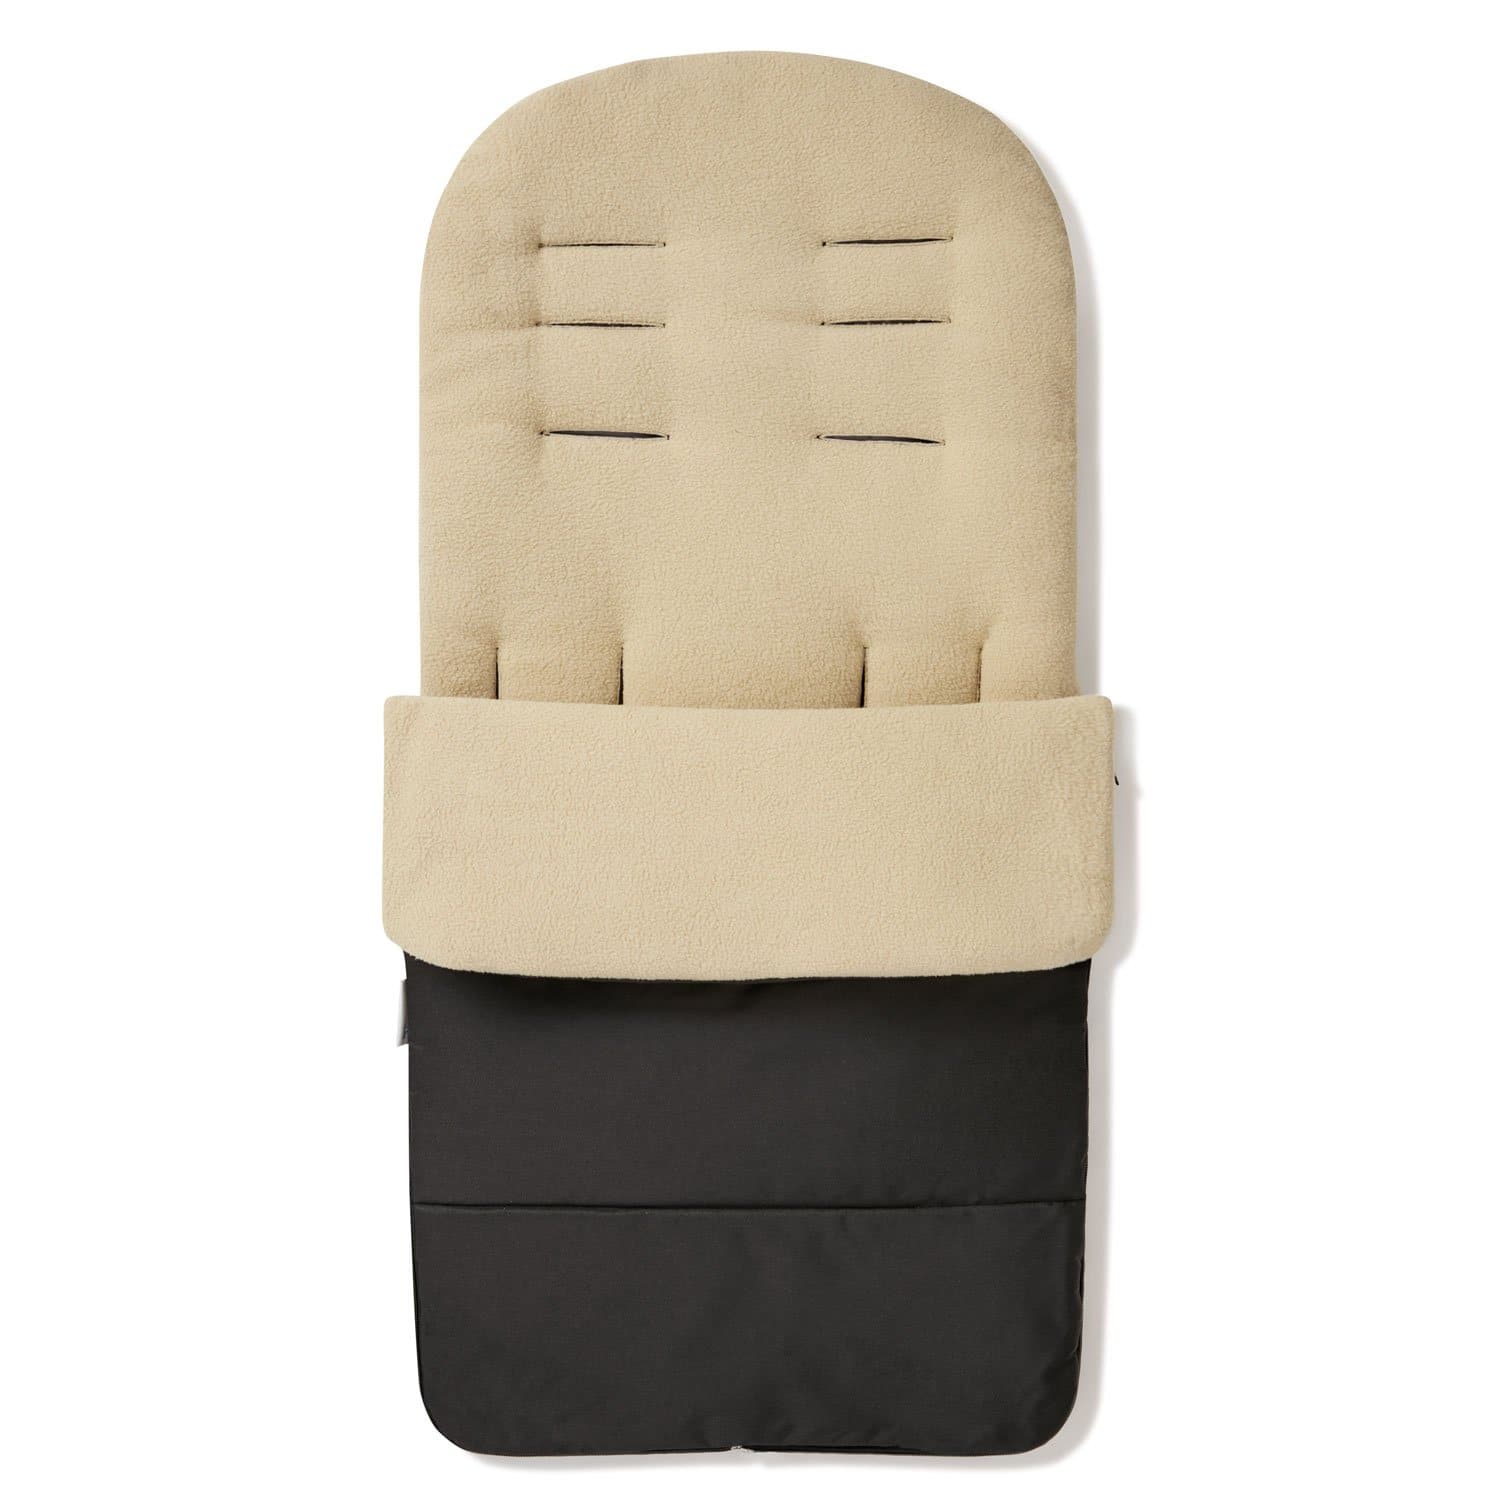 Premium Footmuff / Cosy Toes Compatible with Maxi Cosi - Desert Sand / Fits All Models | For Your Little One